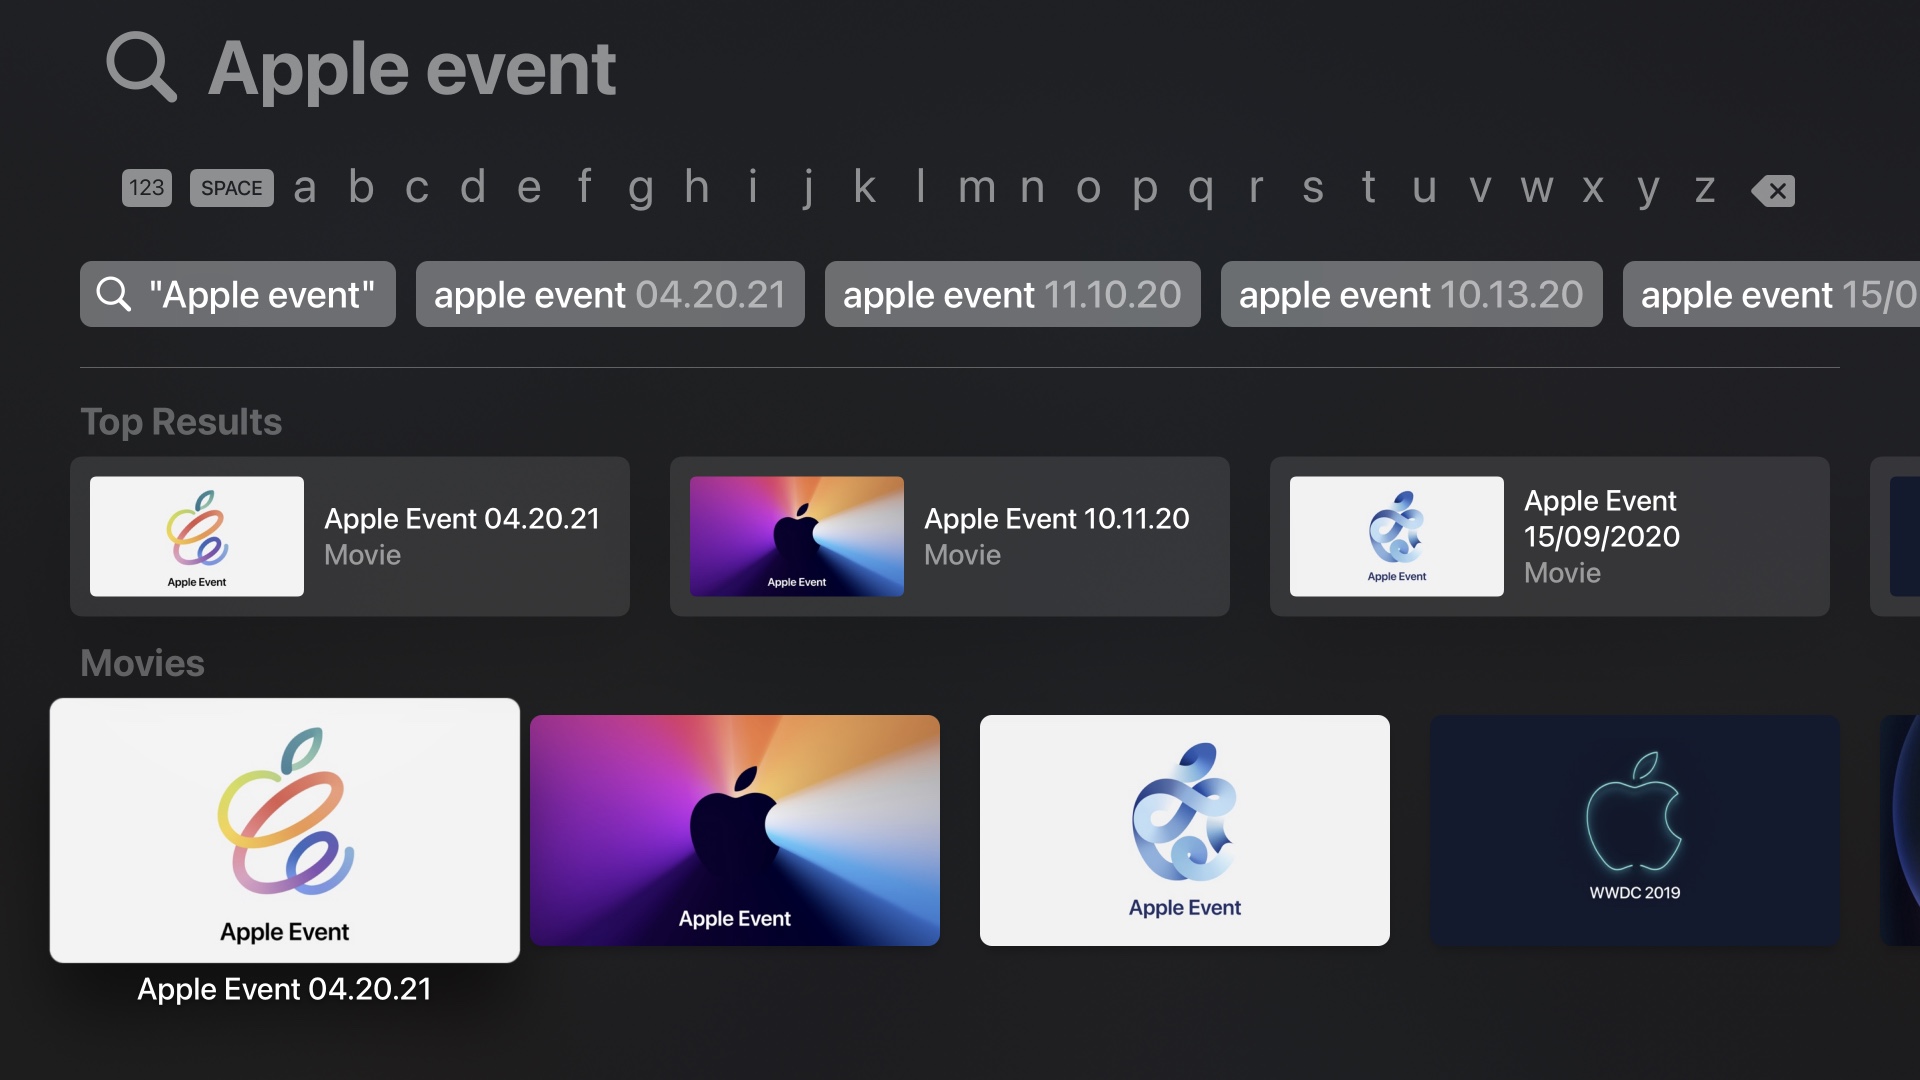 Apple events shown in the Apple TV app